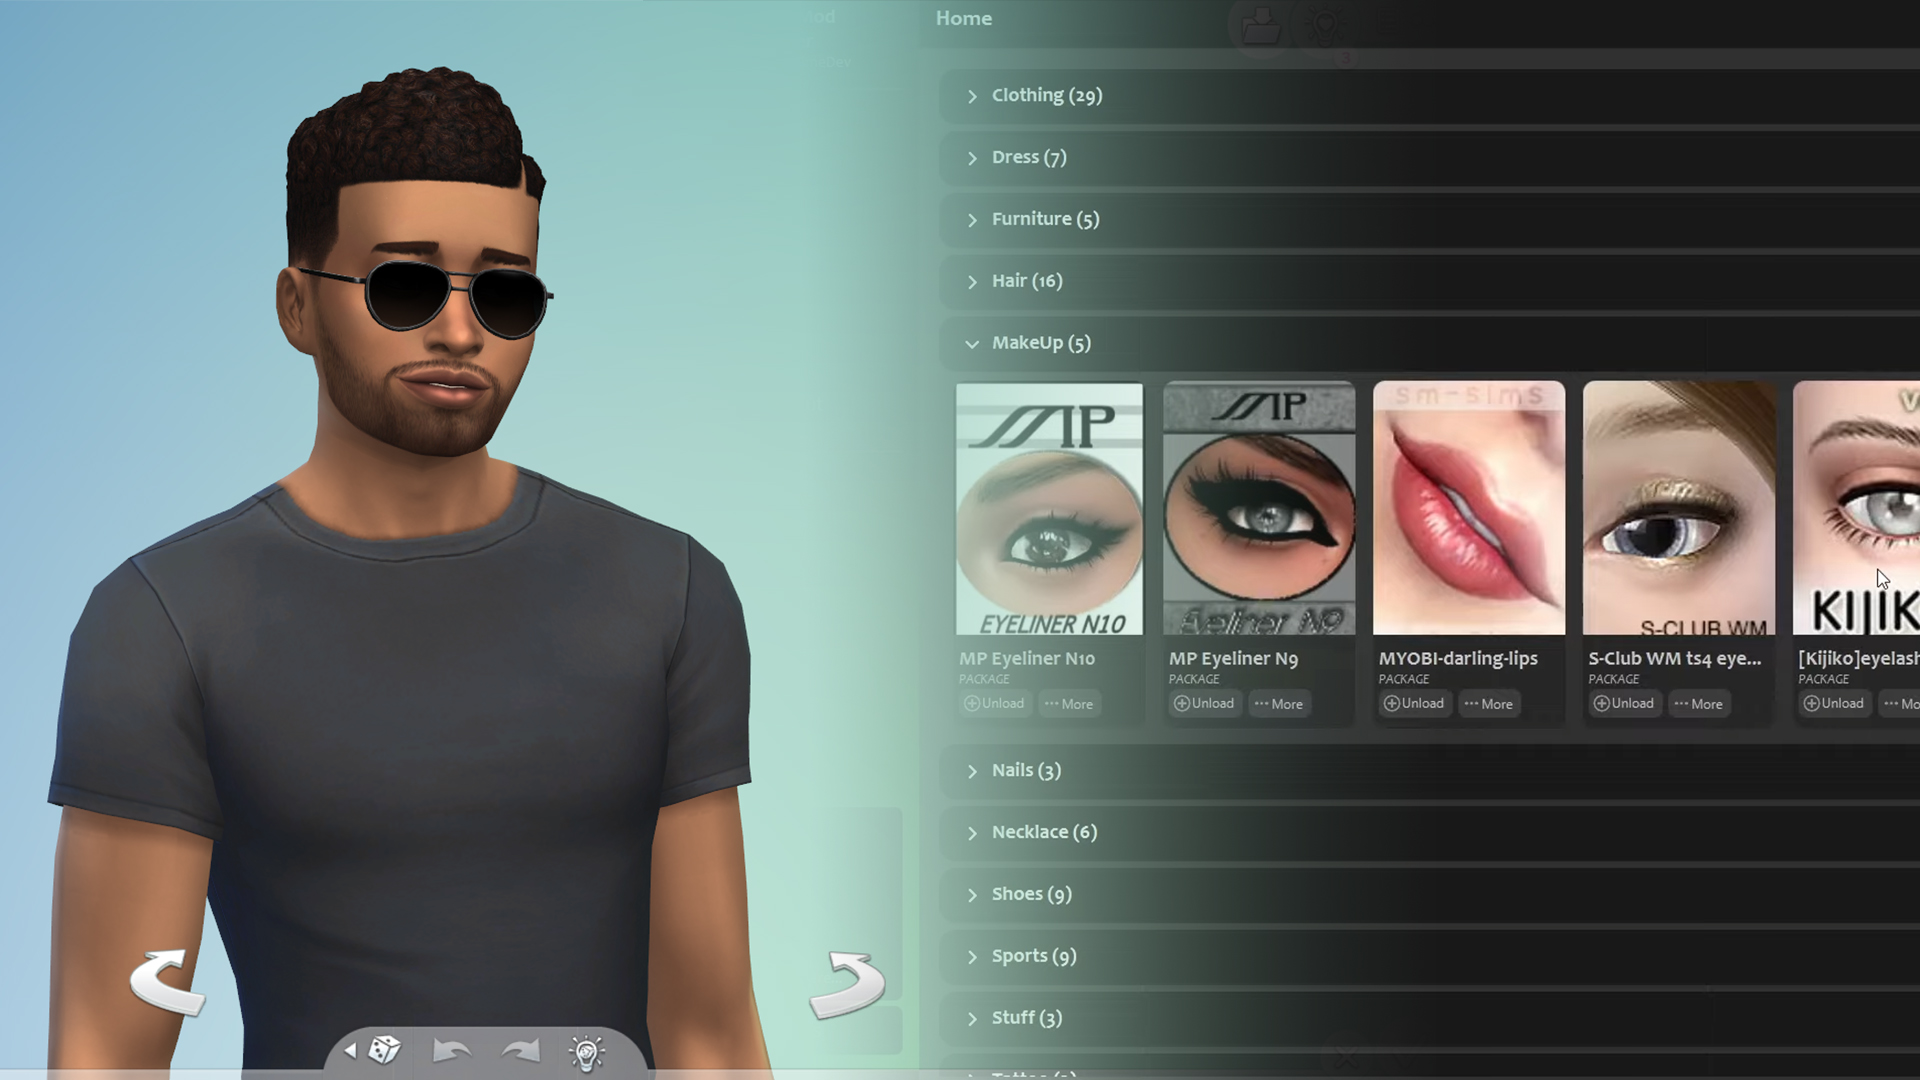 The Sims 4 Mod Manager is Officially Live!